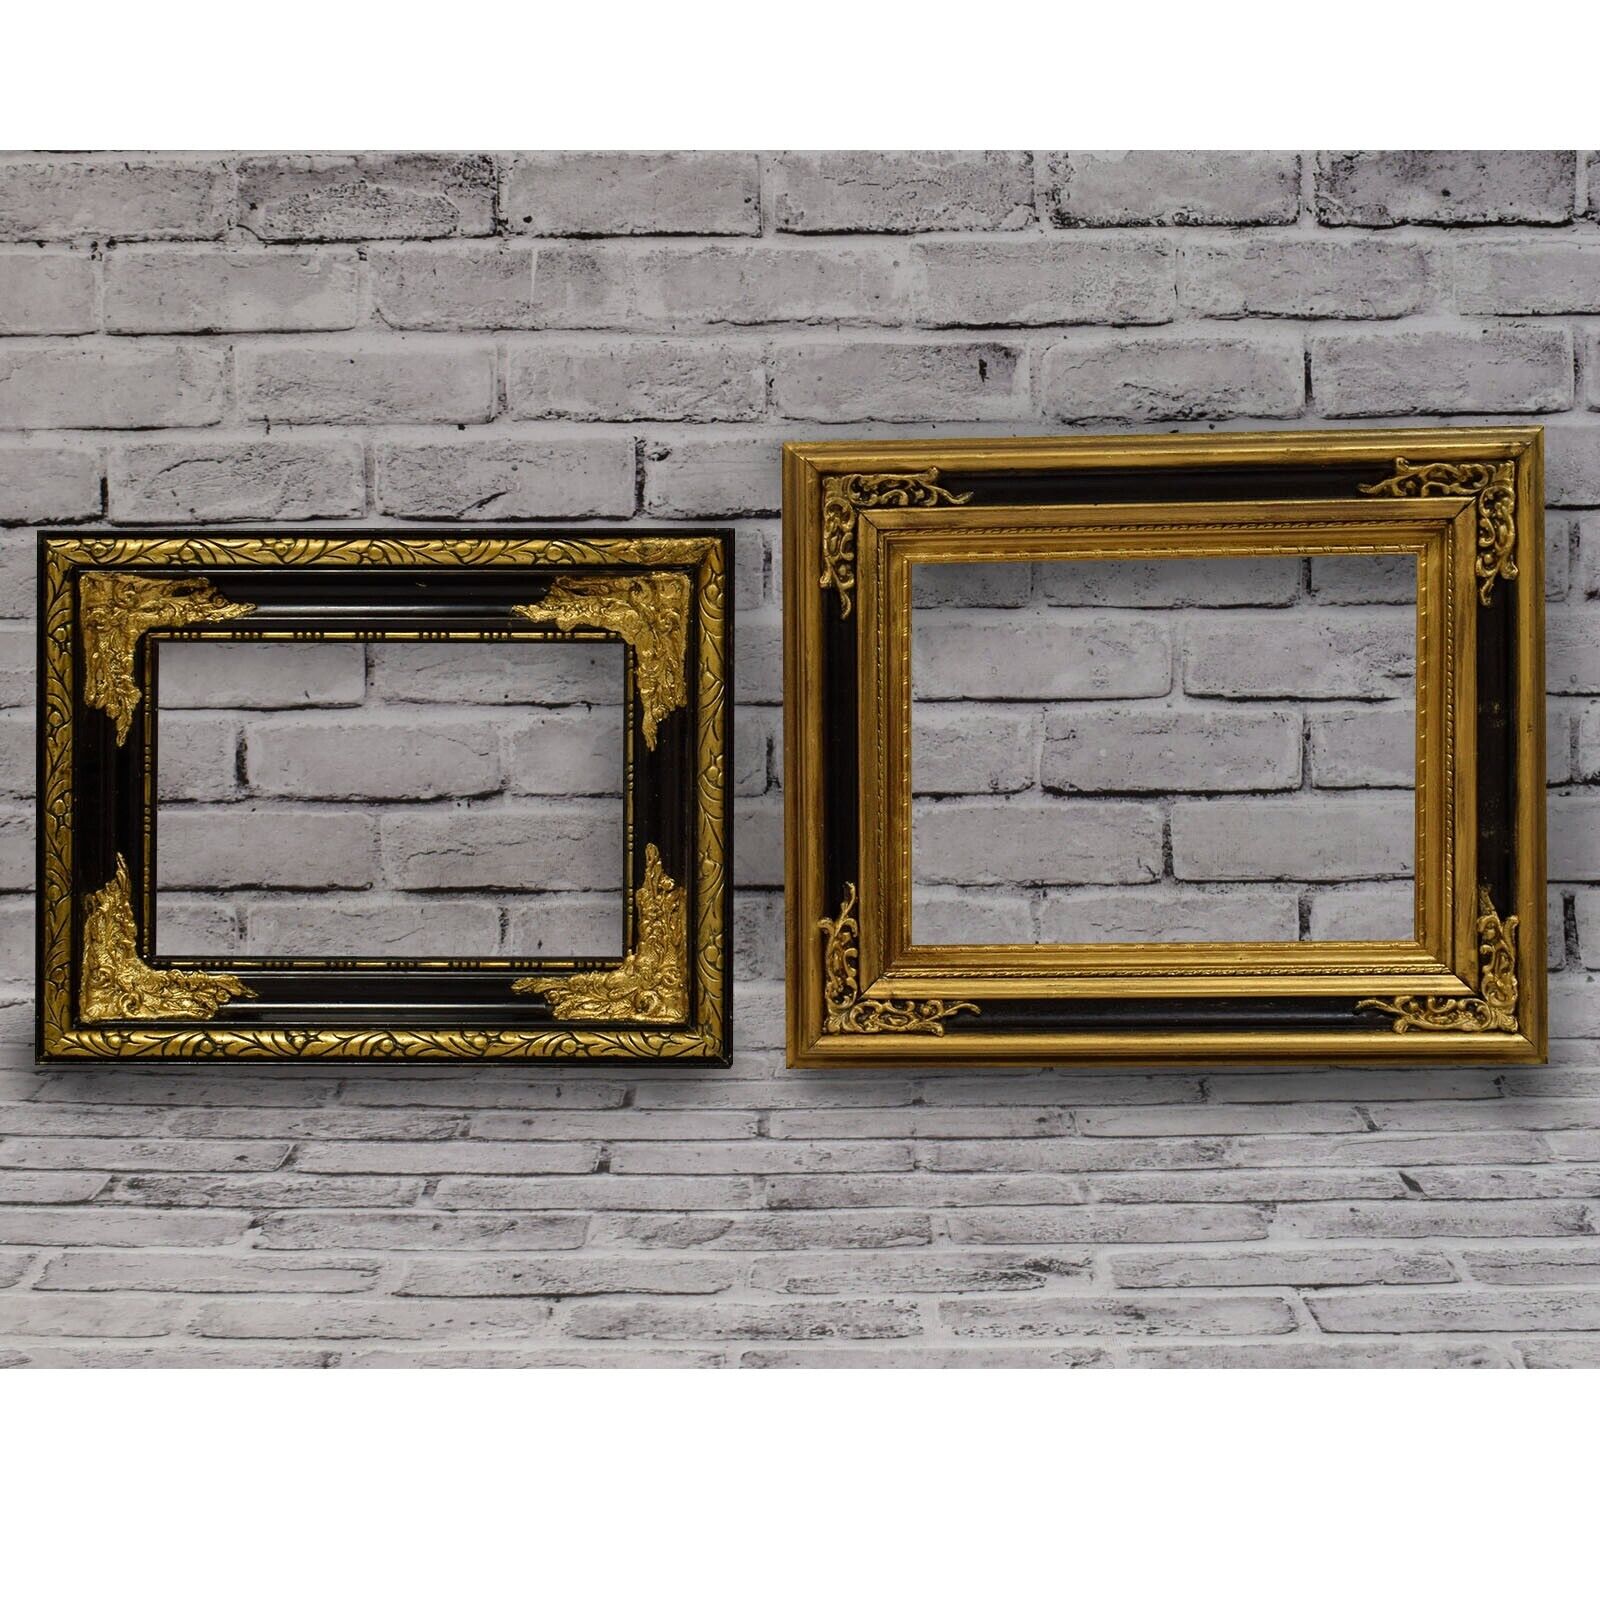 Ca. 1920-1950 Set of 2 old wooden frames dimensions: 11.4 x 9 in inside